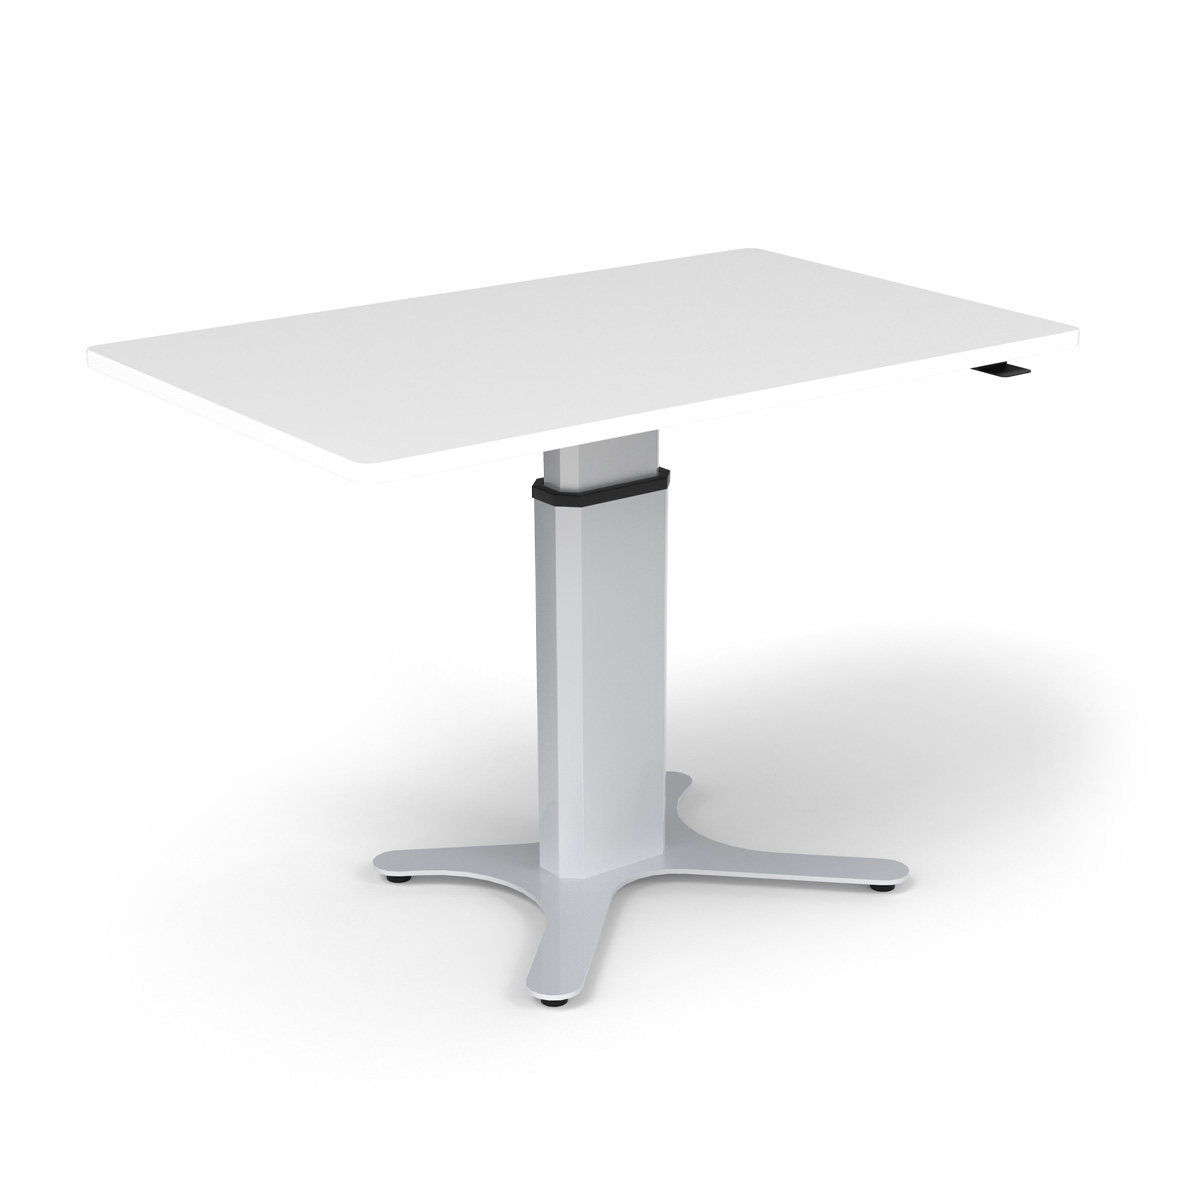 HAT Collective M-Series Height-Adjustable Tables